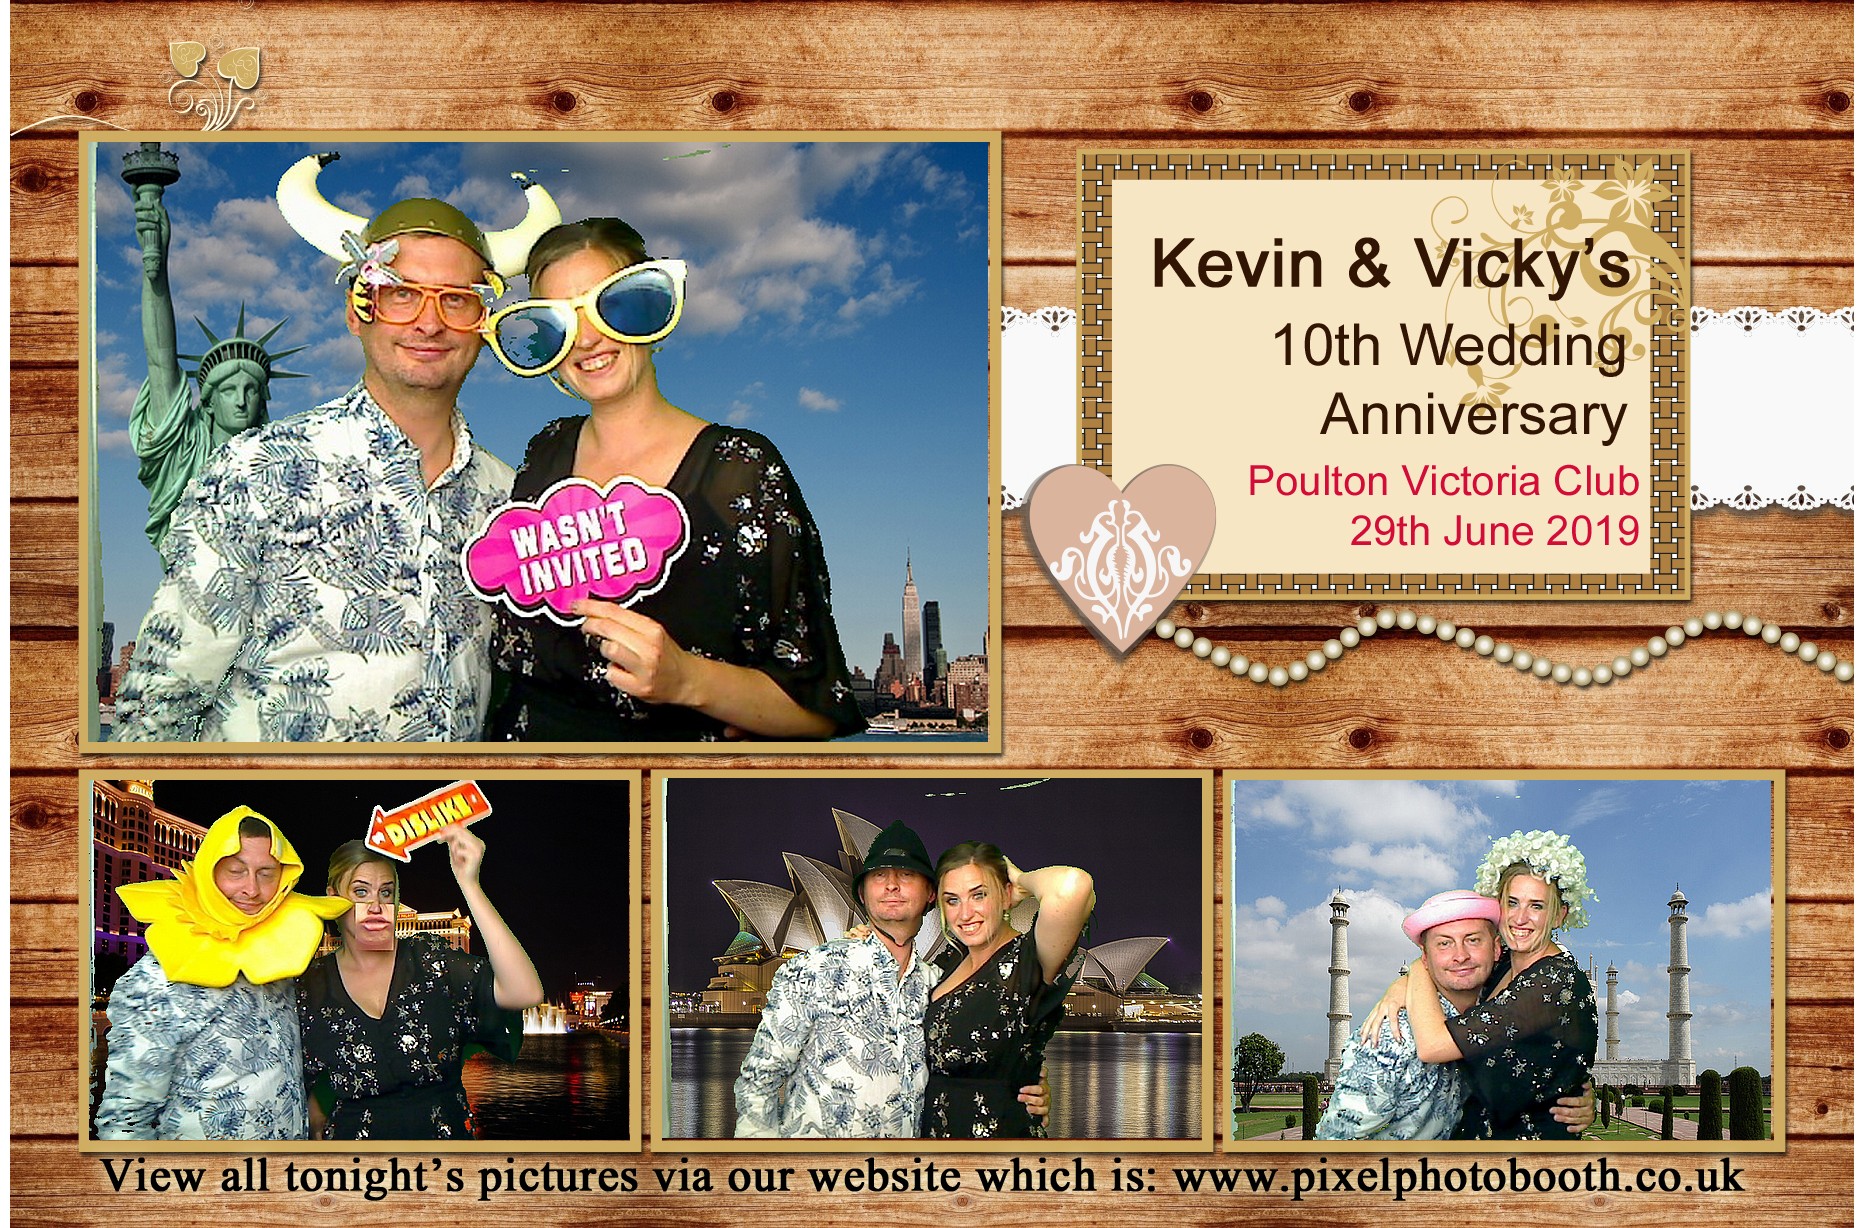 29th June 2019: Kevin and Vicky's Wedding Anniversary